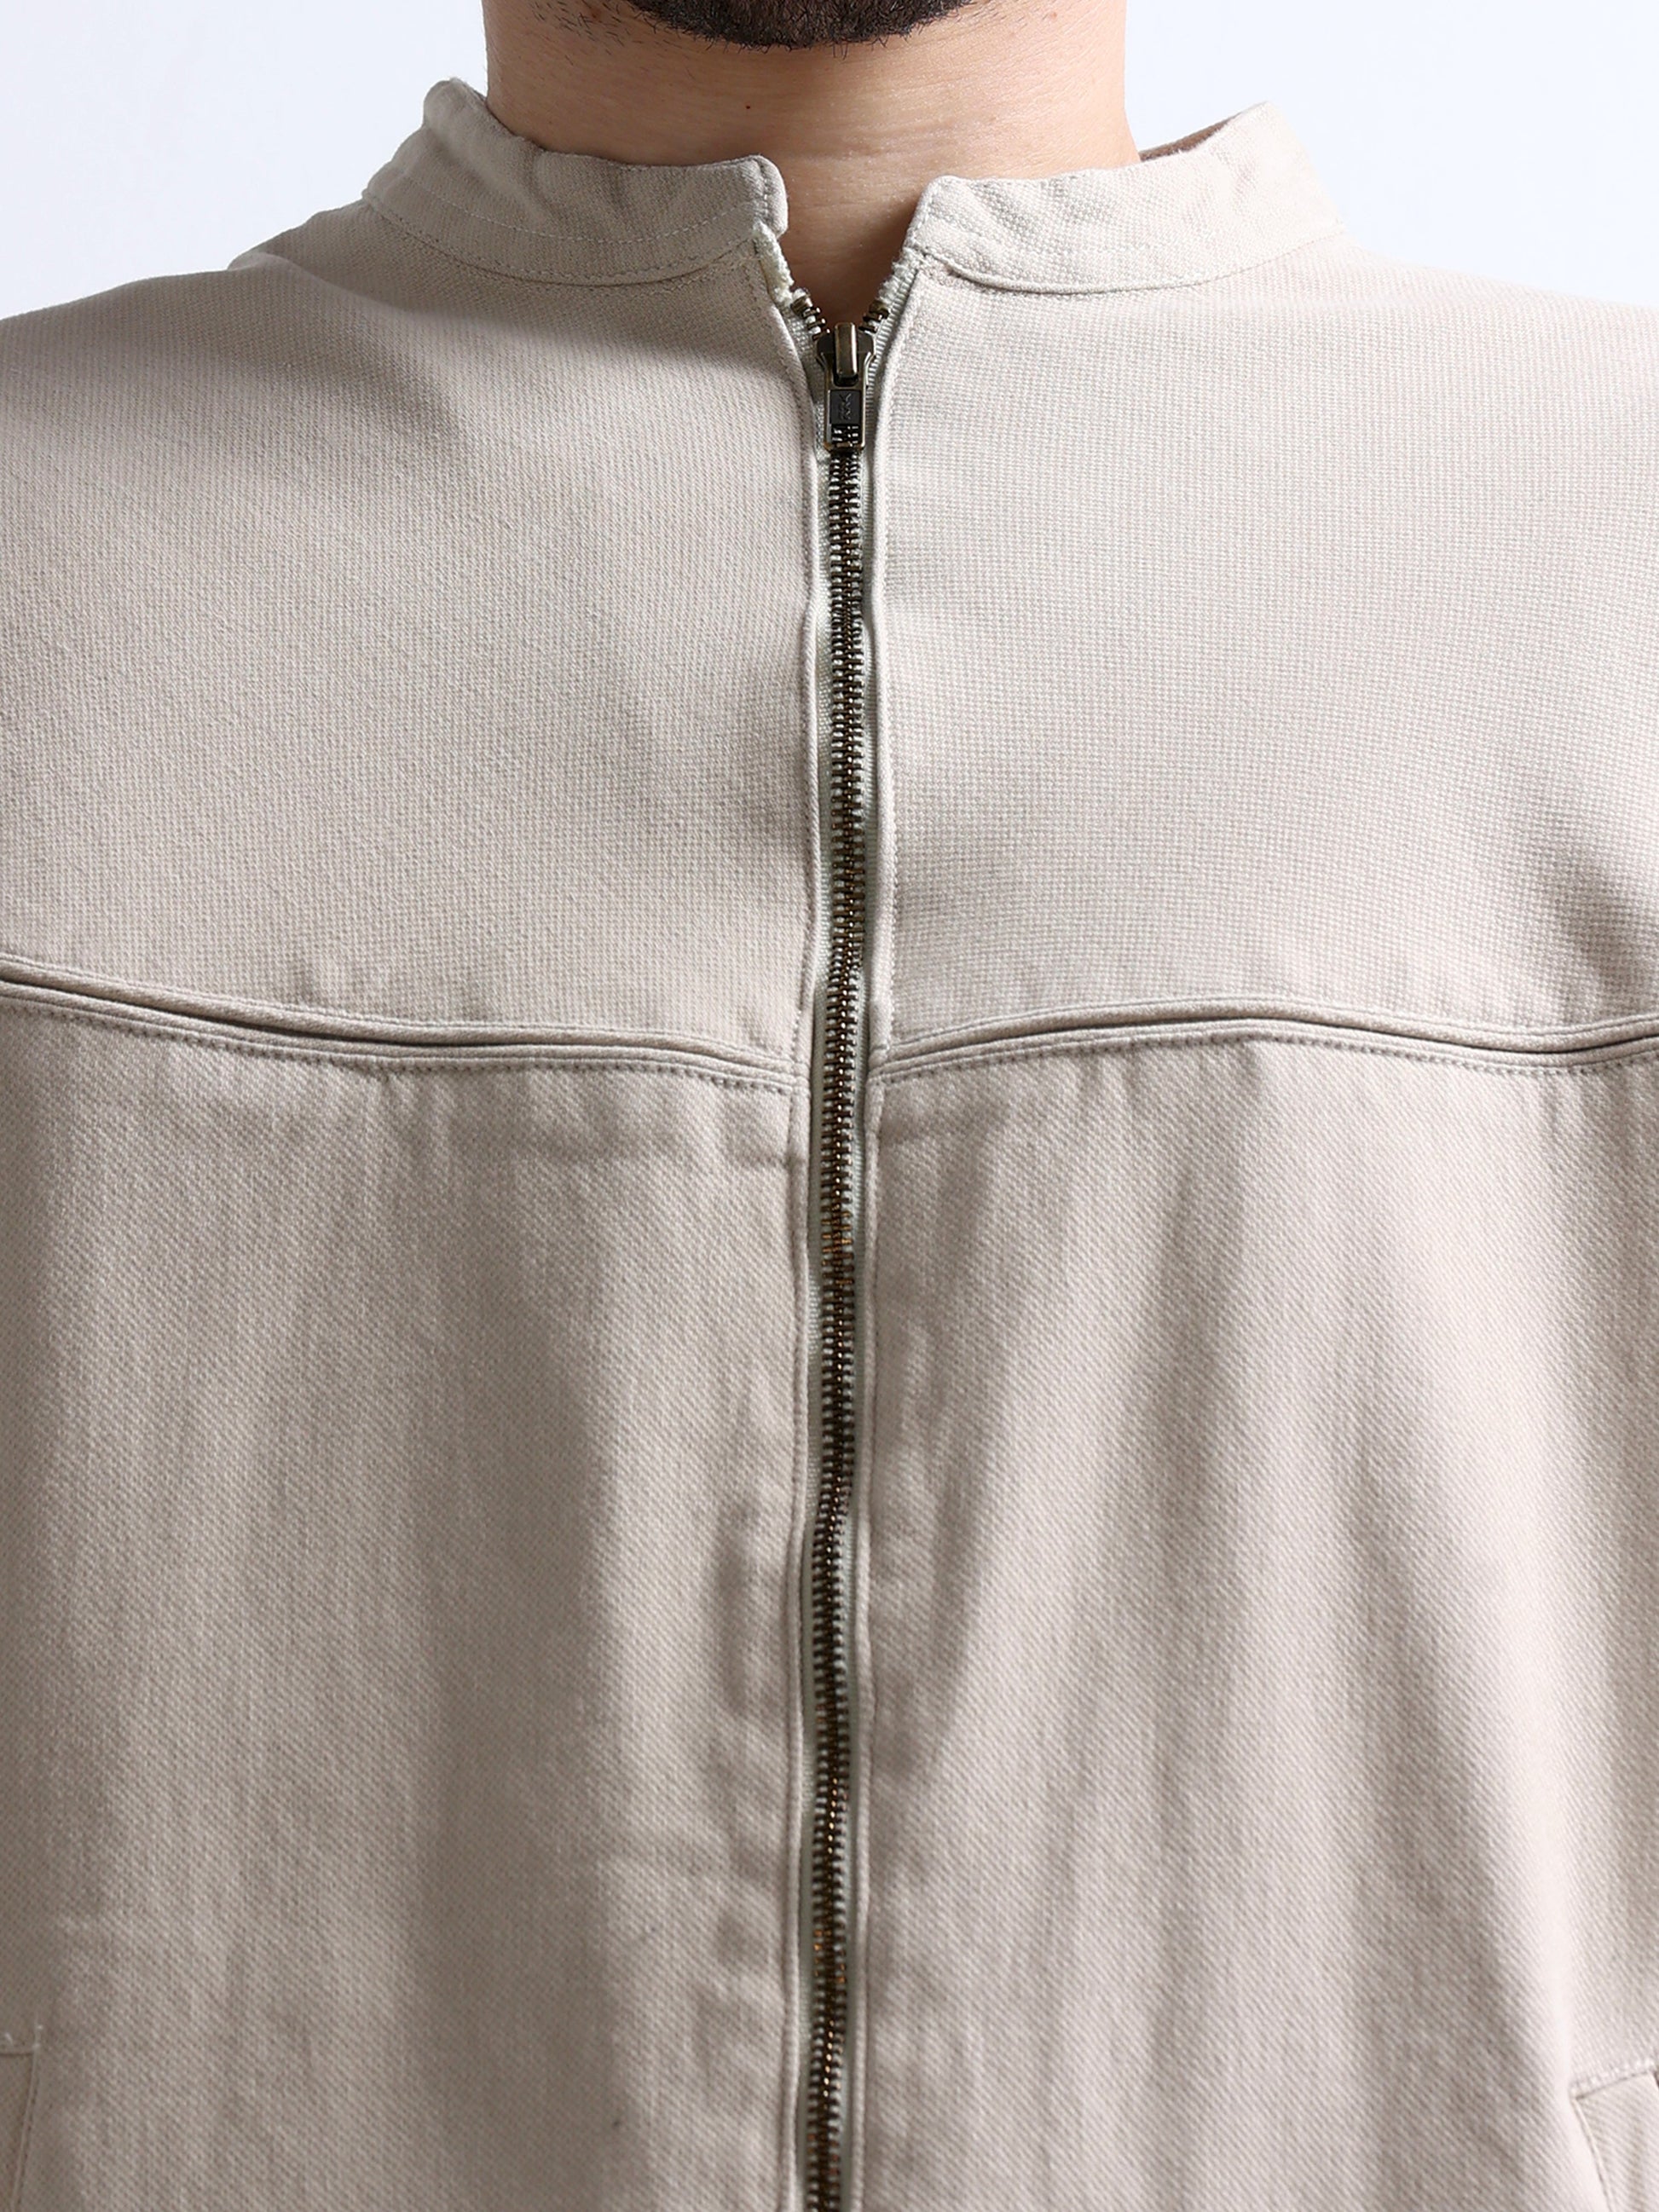 Cream Cut and Sew Pullover Men's Jacket 